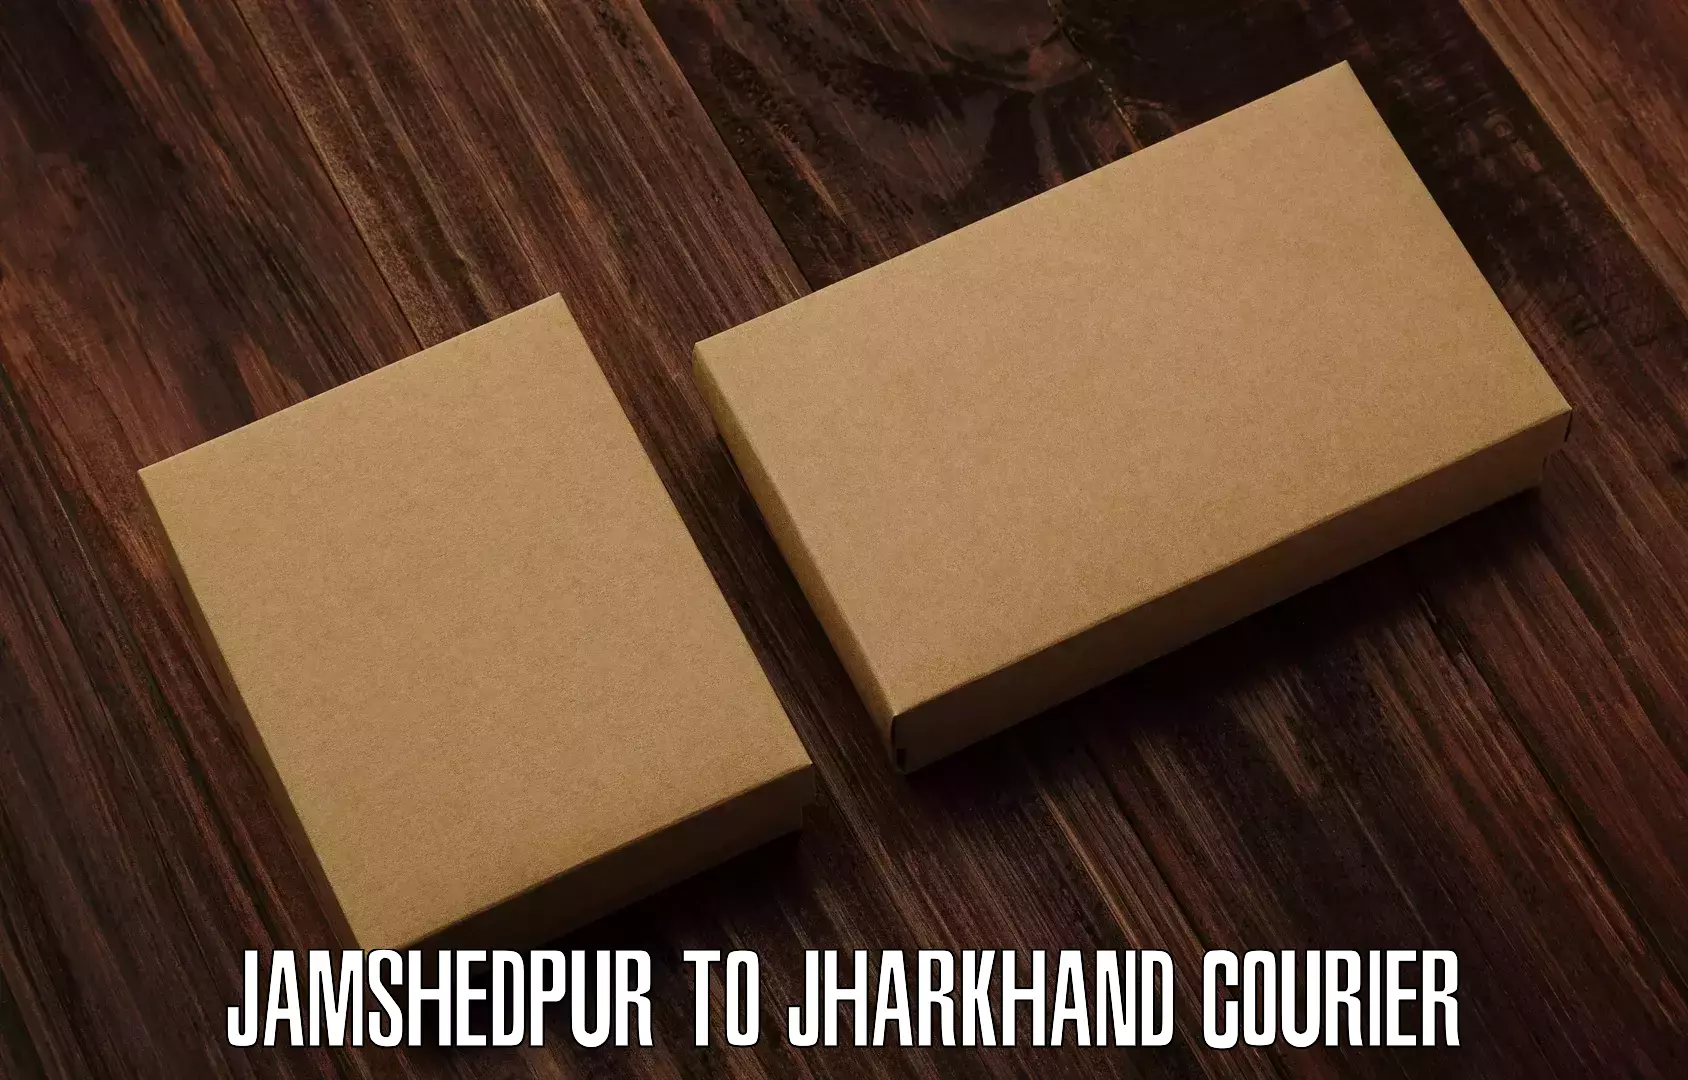 Customer-oriented courier services Jamshedpur to Ranchi